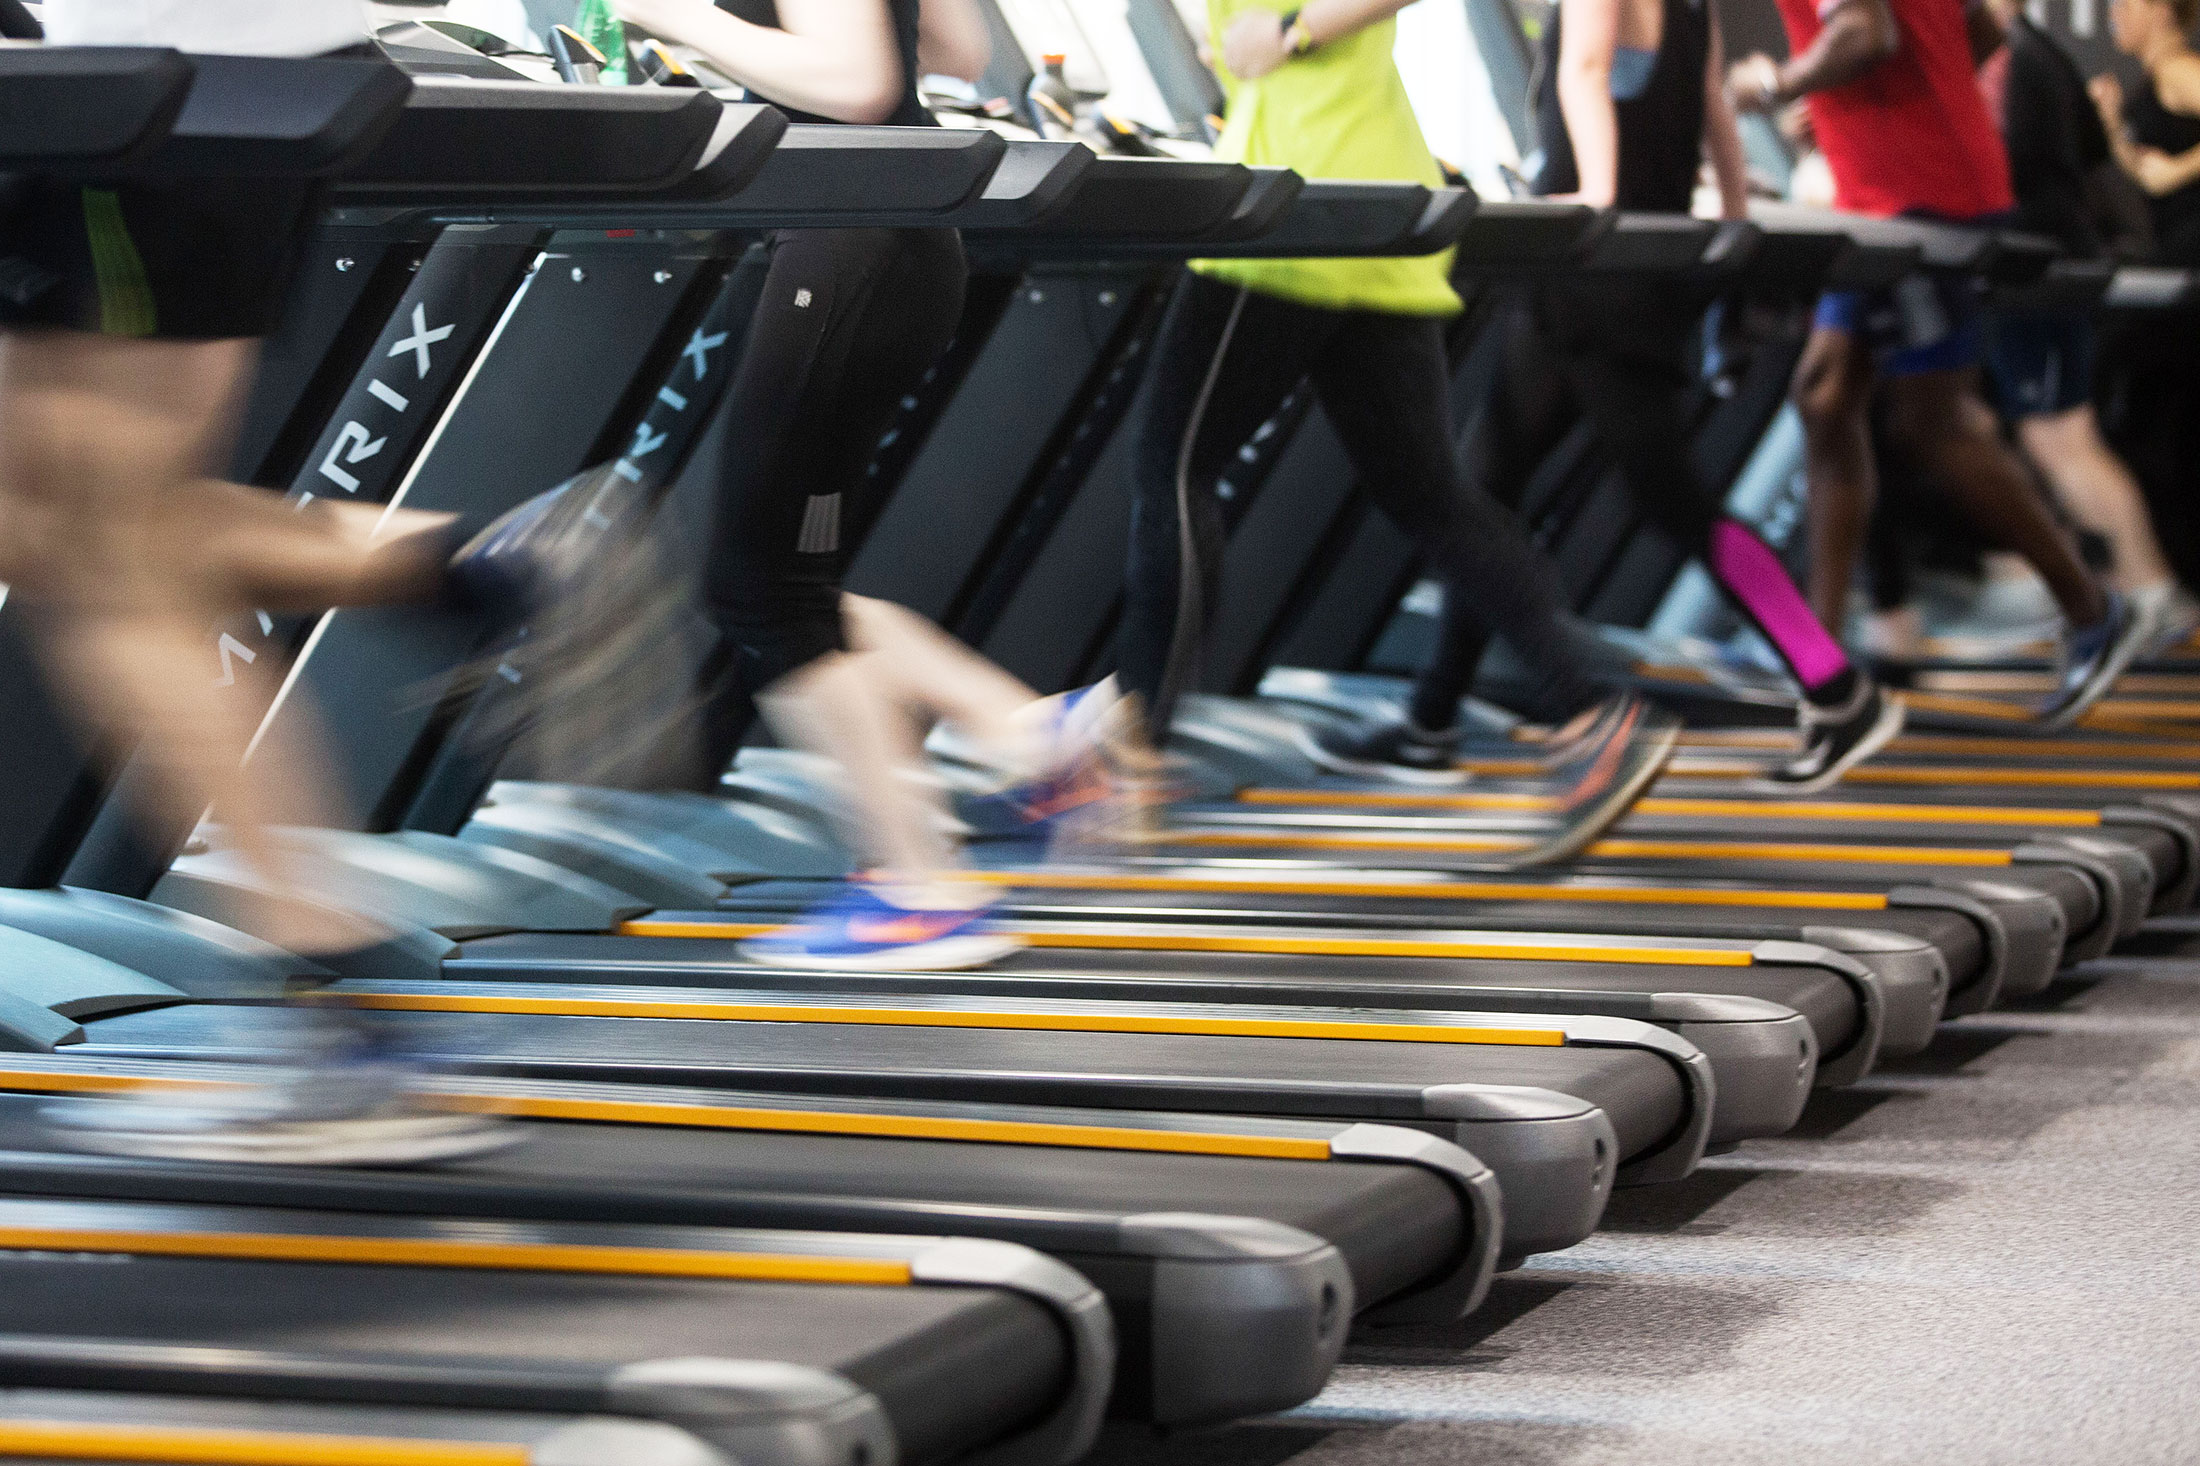 People run on treadmills to exercise during a work out session. Photographer: Simon Dawson/Bloomberg